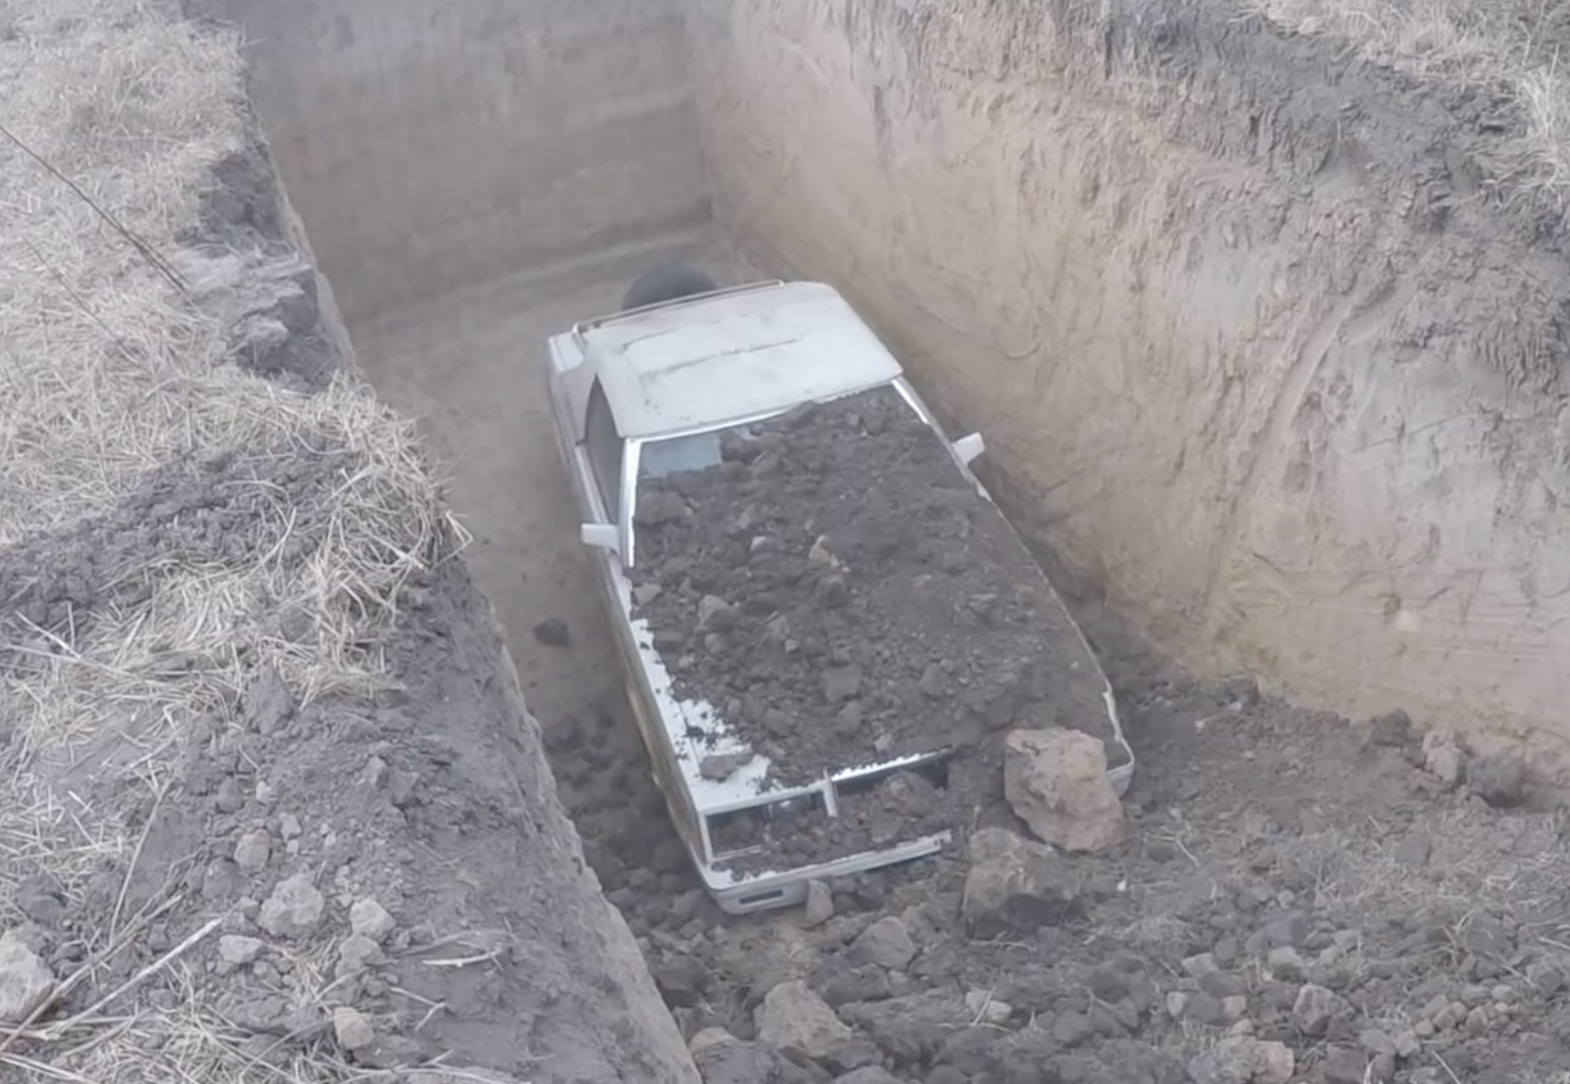 It’s Better This Way: Watch As This Chrysler LeBaron Droptop Gets Buried For Being A POS!